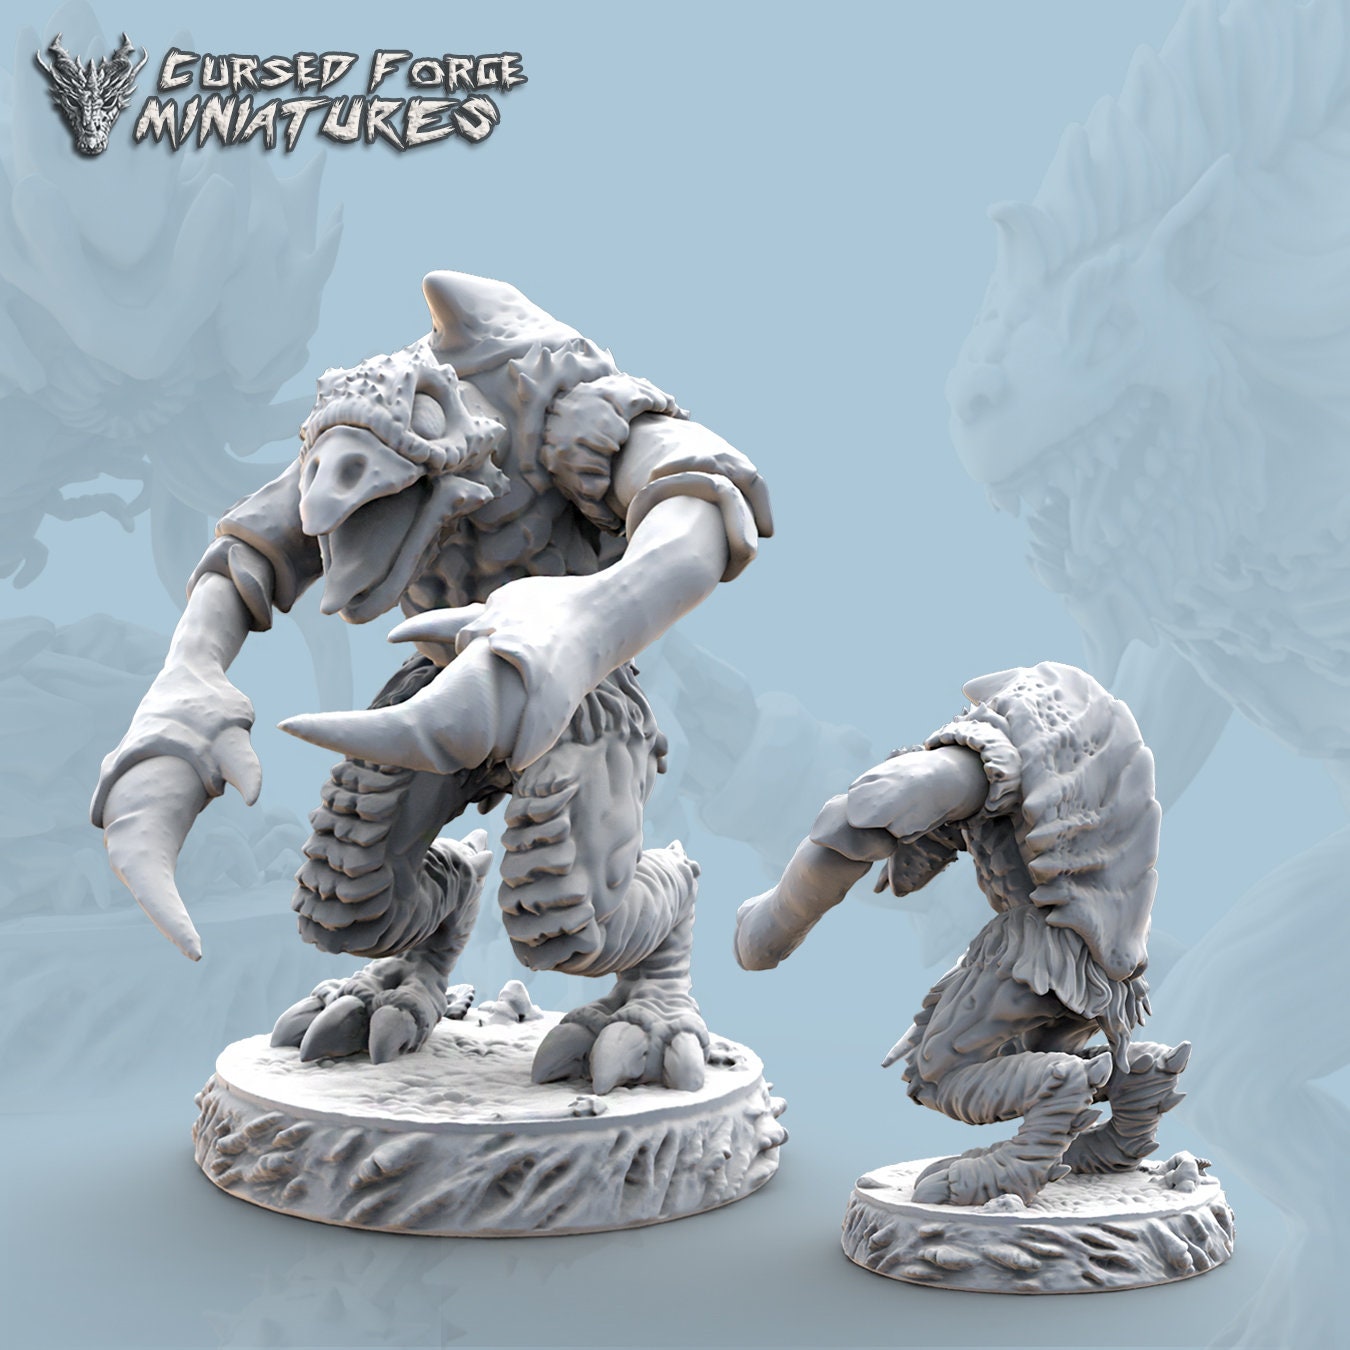 HOOK HORROR, by Cursed Forge Miniatures // 3D Print on Demand / D&D / Pathfinder / RPG